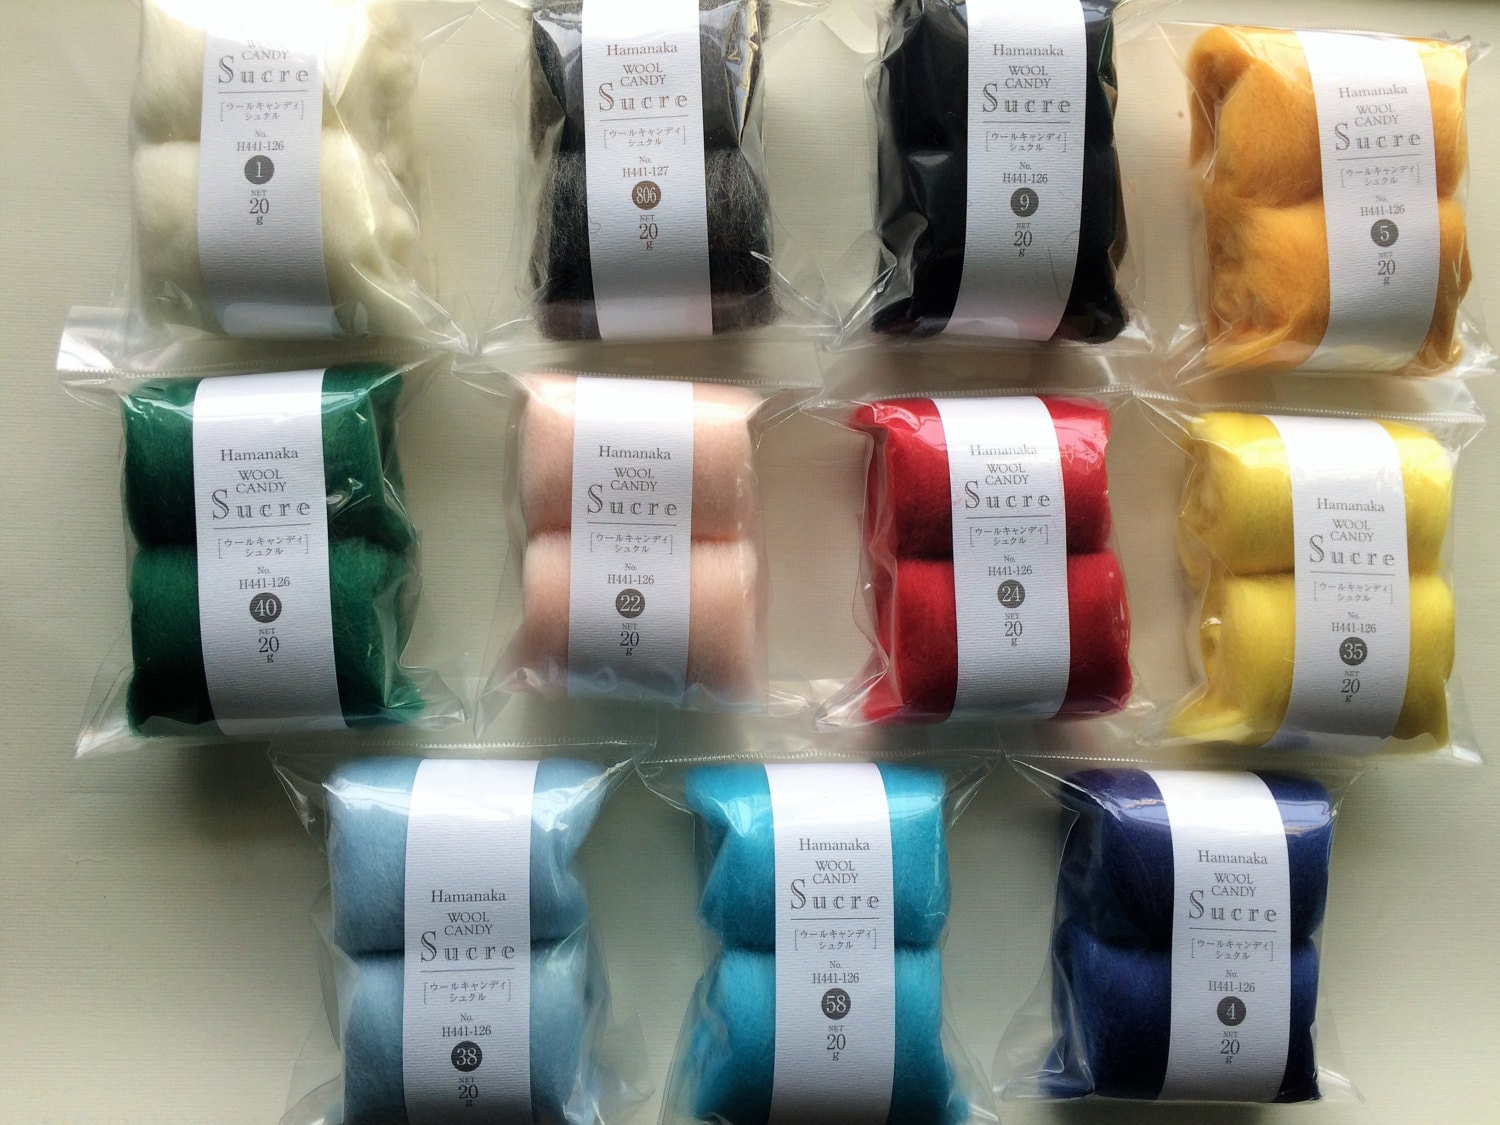 Core Wool Roving per Lb for Needle Felting by the Ounce Felting Wool 3D  Wool Art, Felted Animals, Felting Supplies 